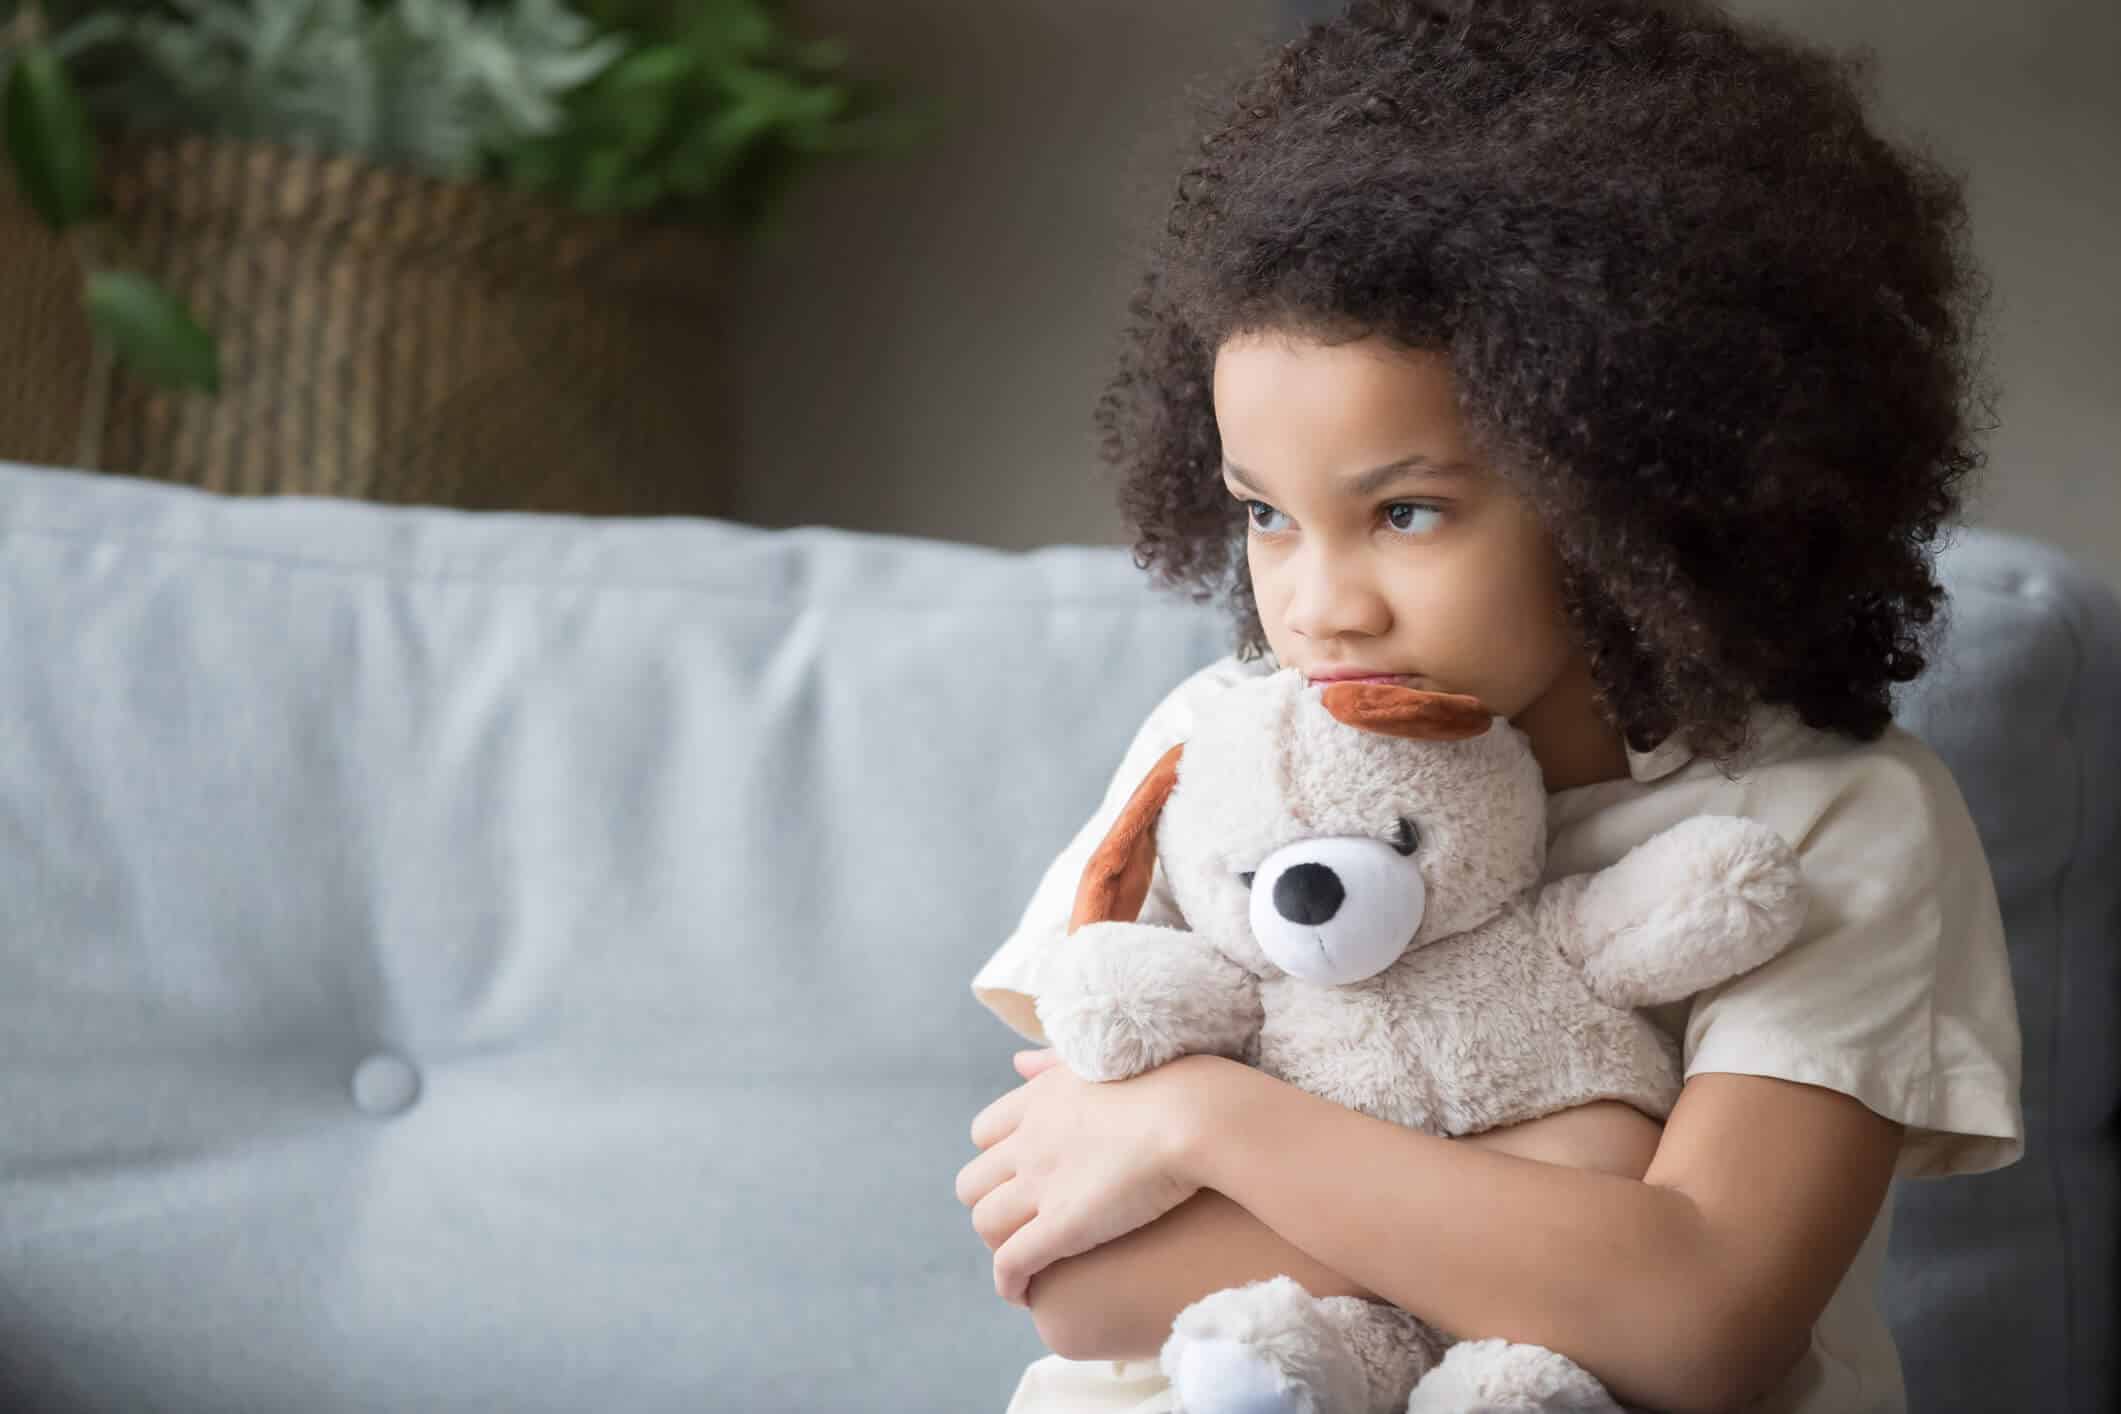 How to Keep Children Safe From Domestic Abuse